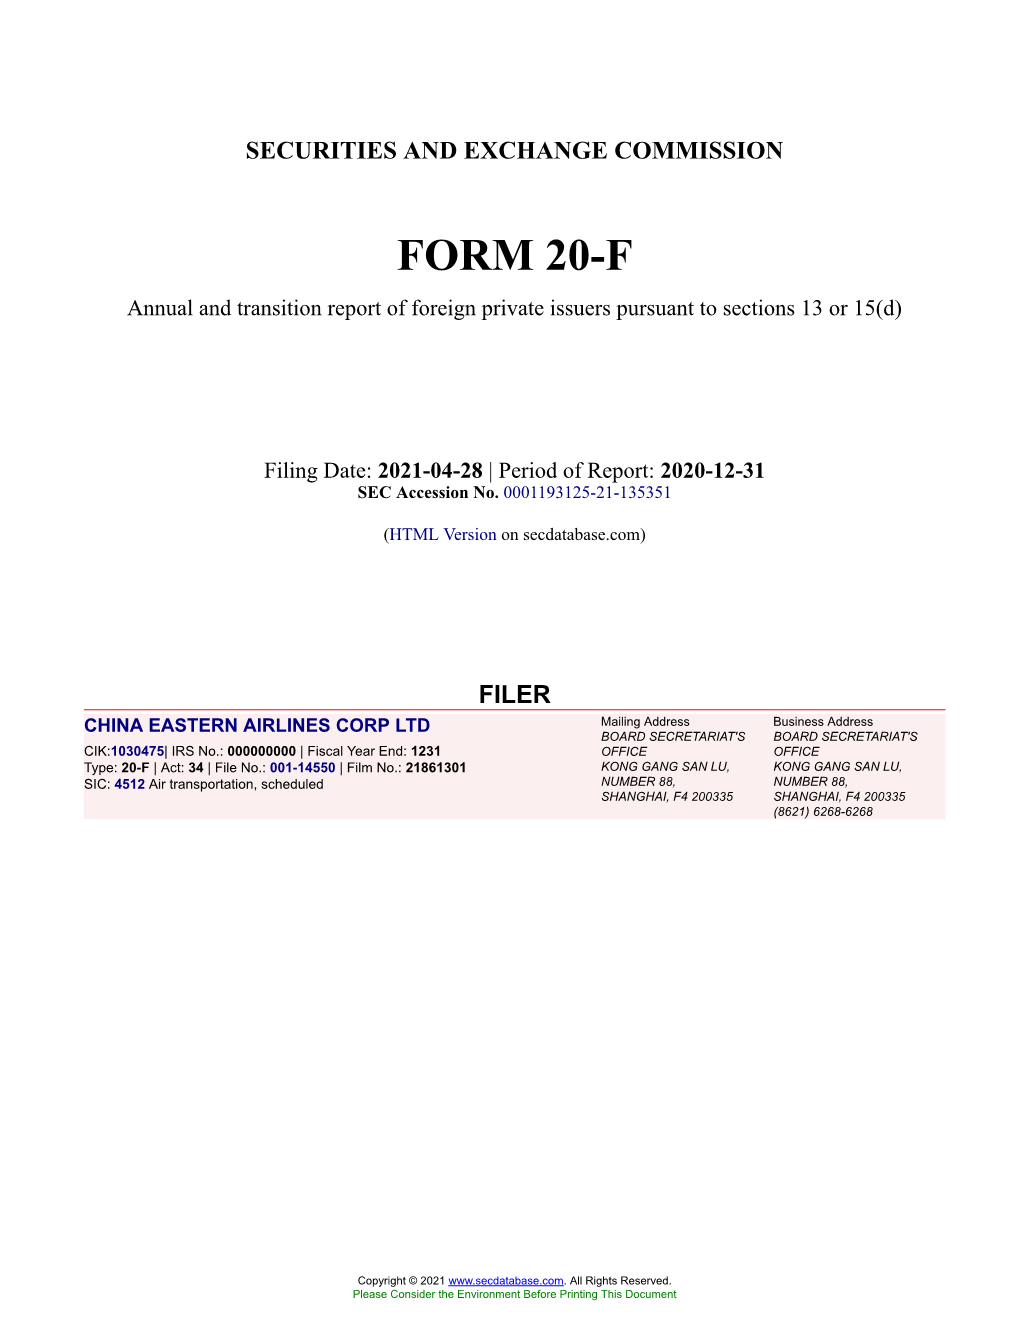 CHINA EASTERN AIRLINES CORP LTD Form 20-F Filed 2021-04-28